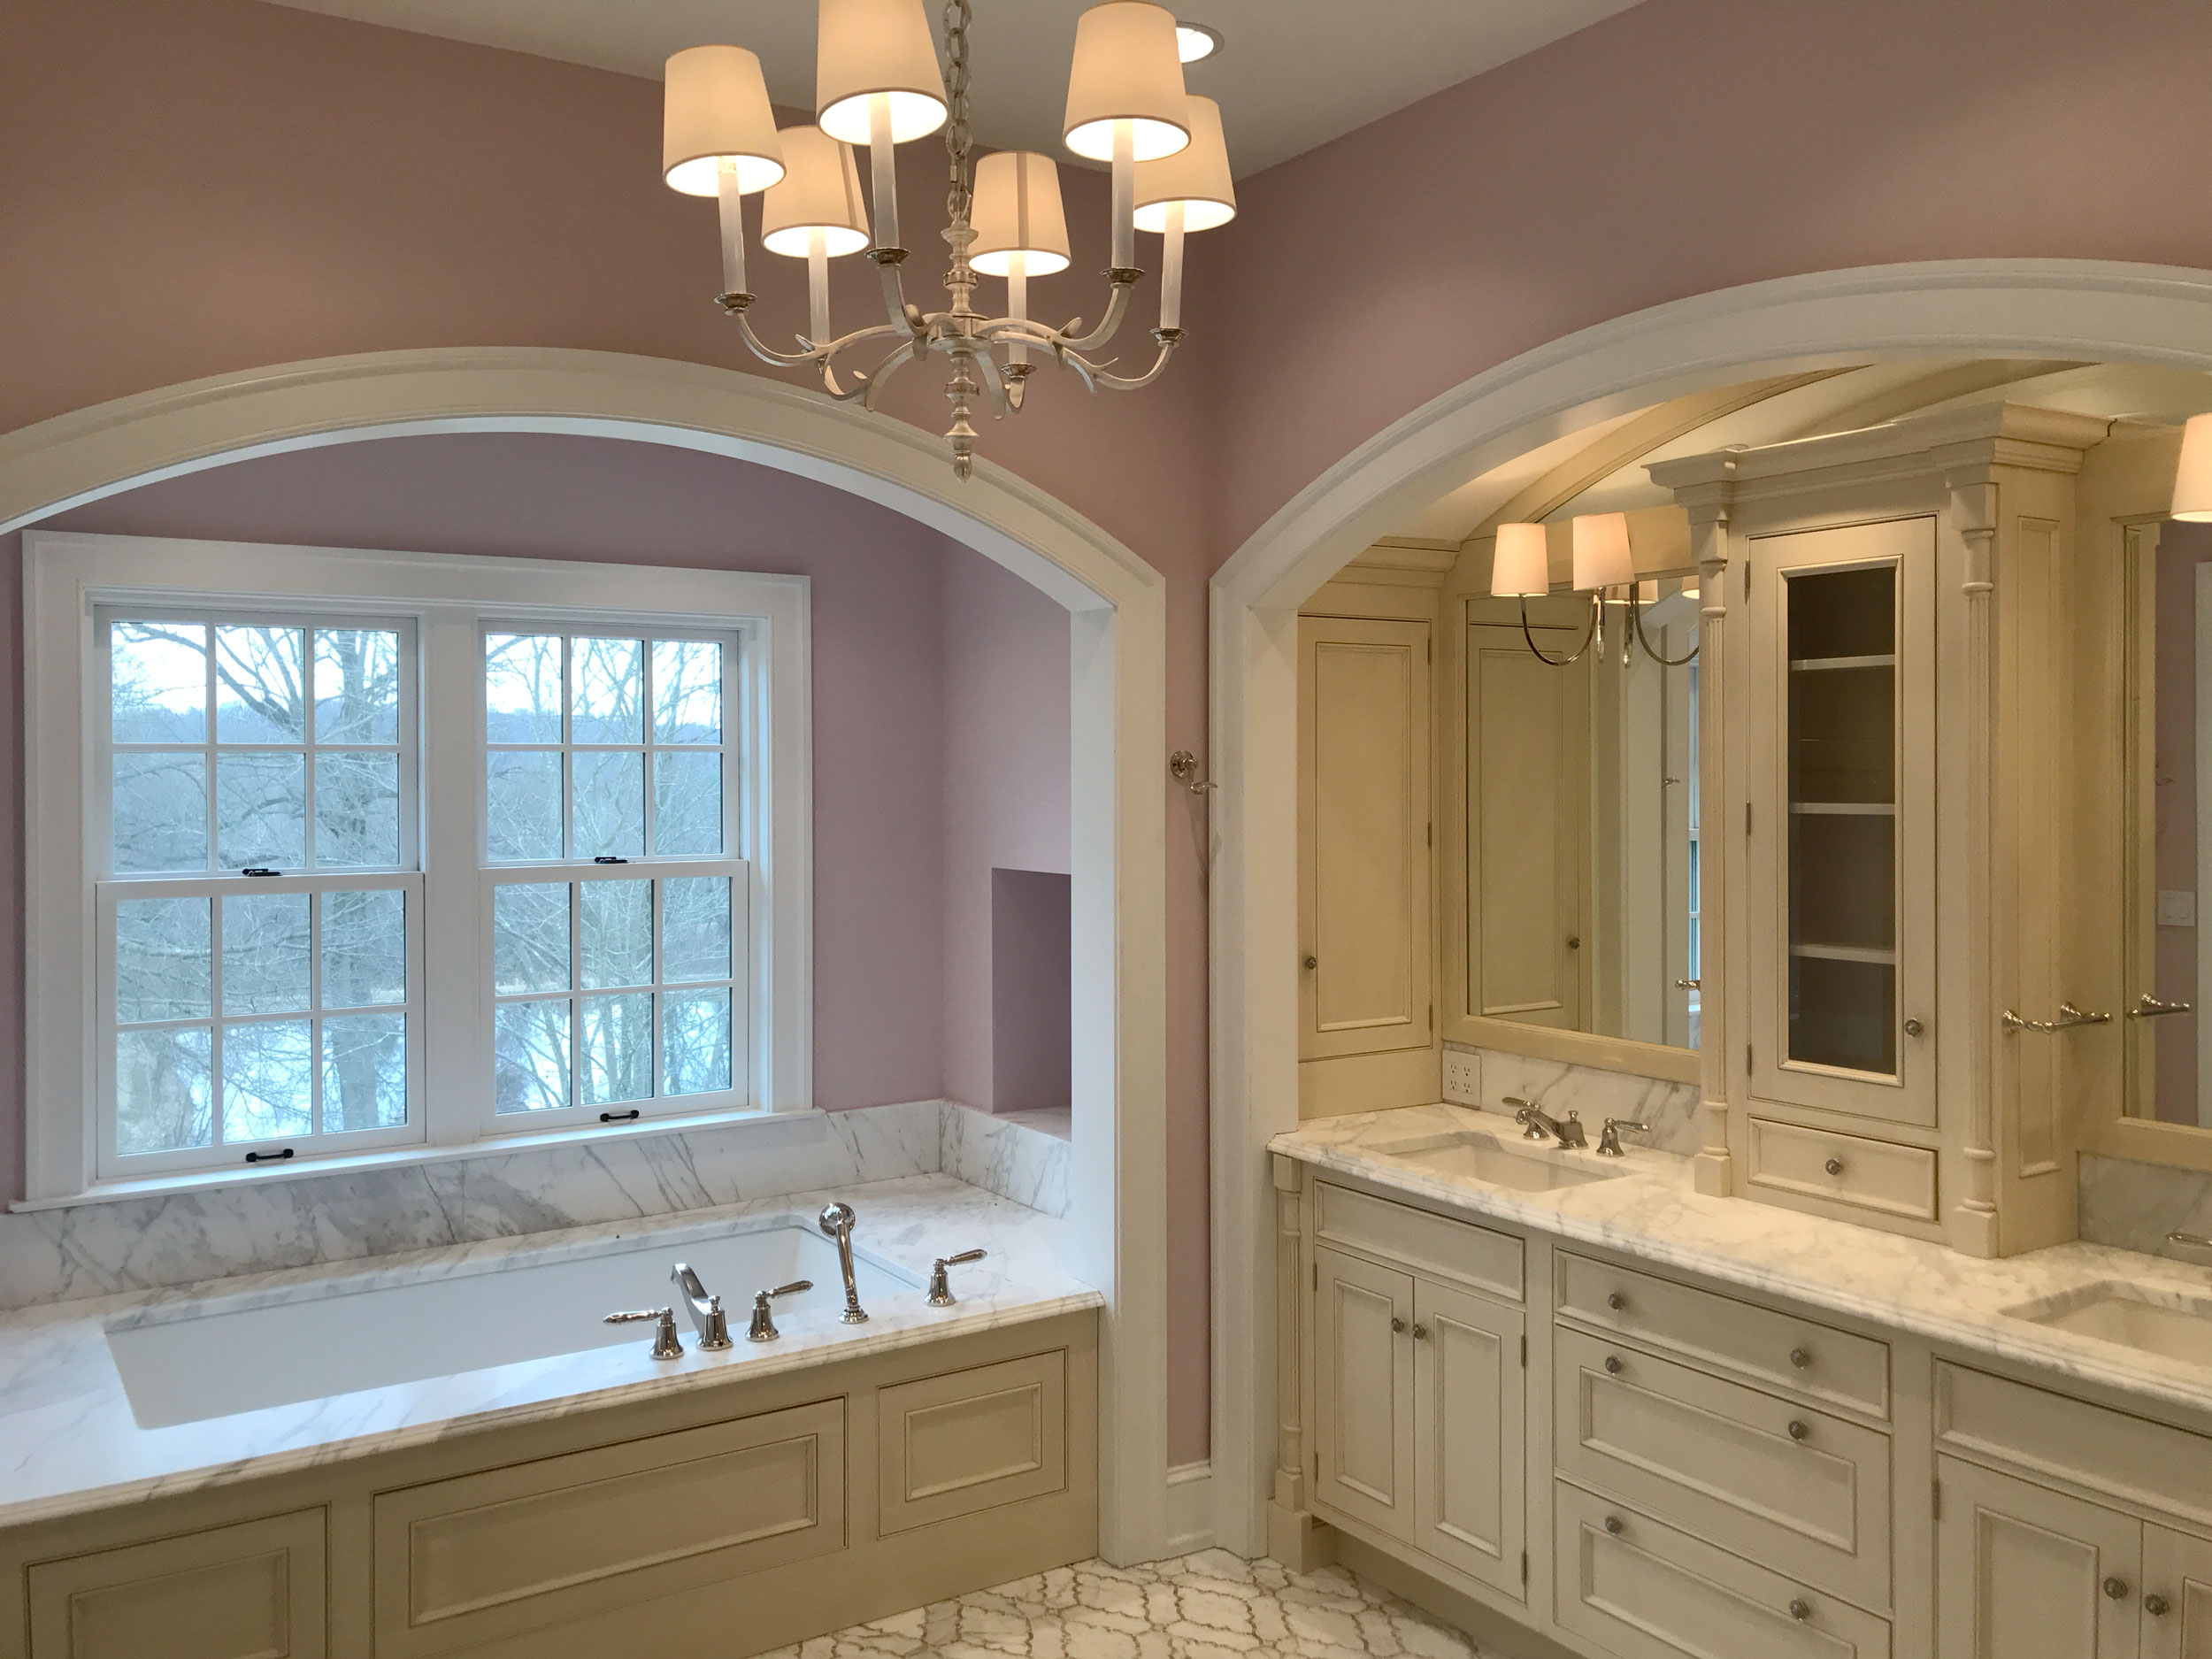 Doylestown Bathroom Remodel from out of county